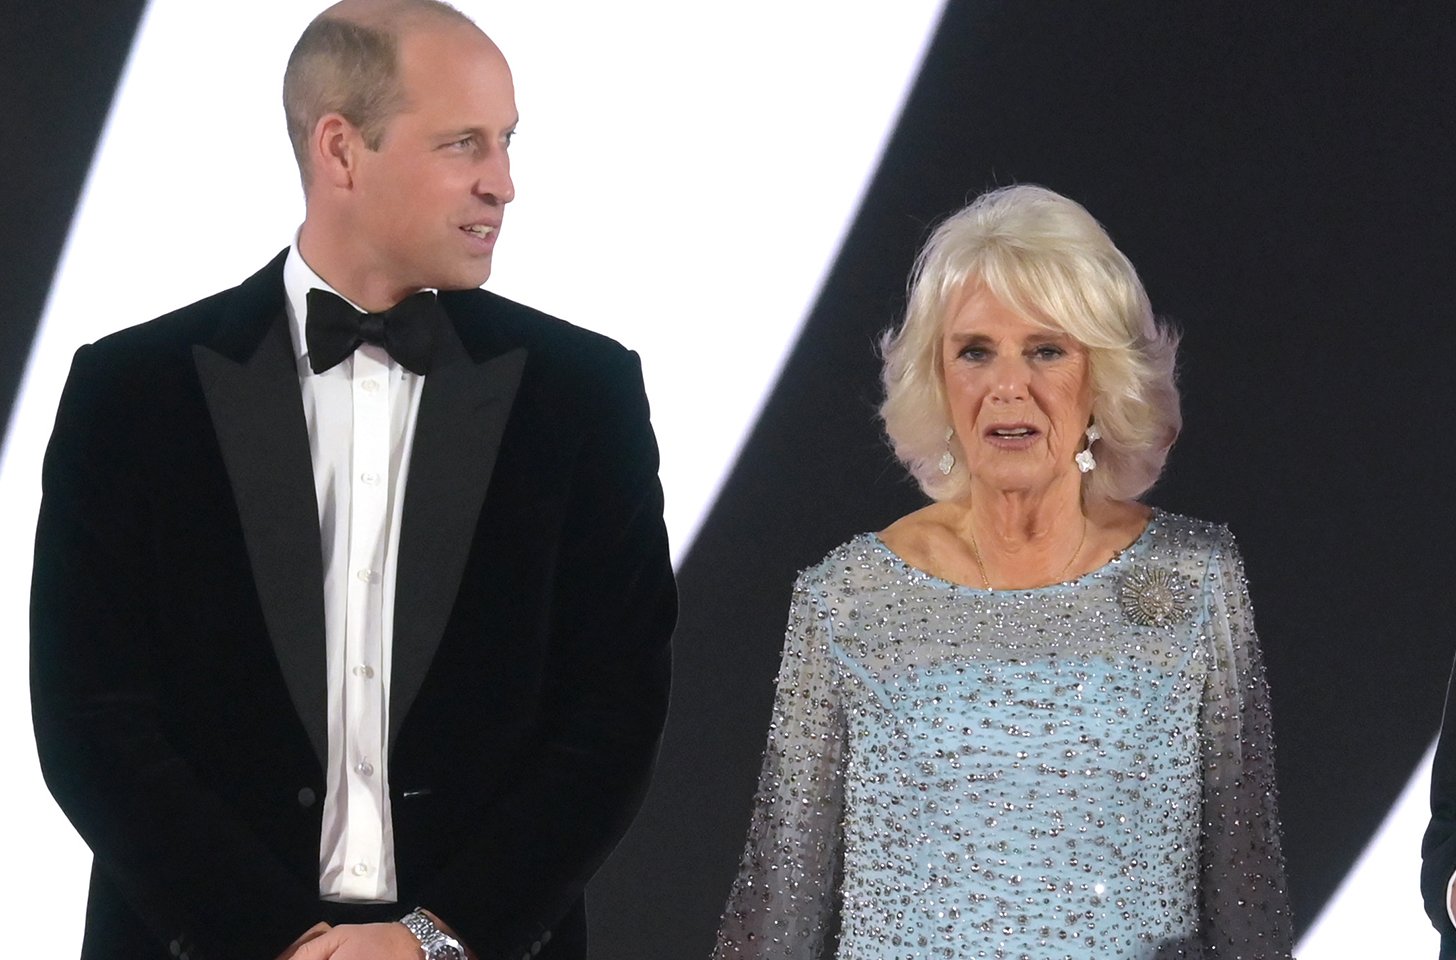 Prince William Engaged in Terrible Fights with Camilla Parker Bowles